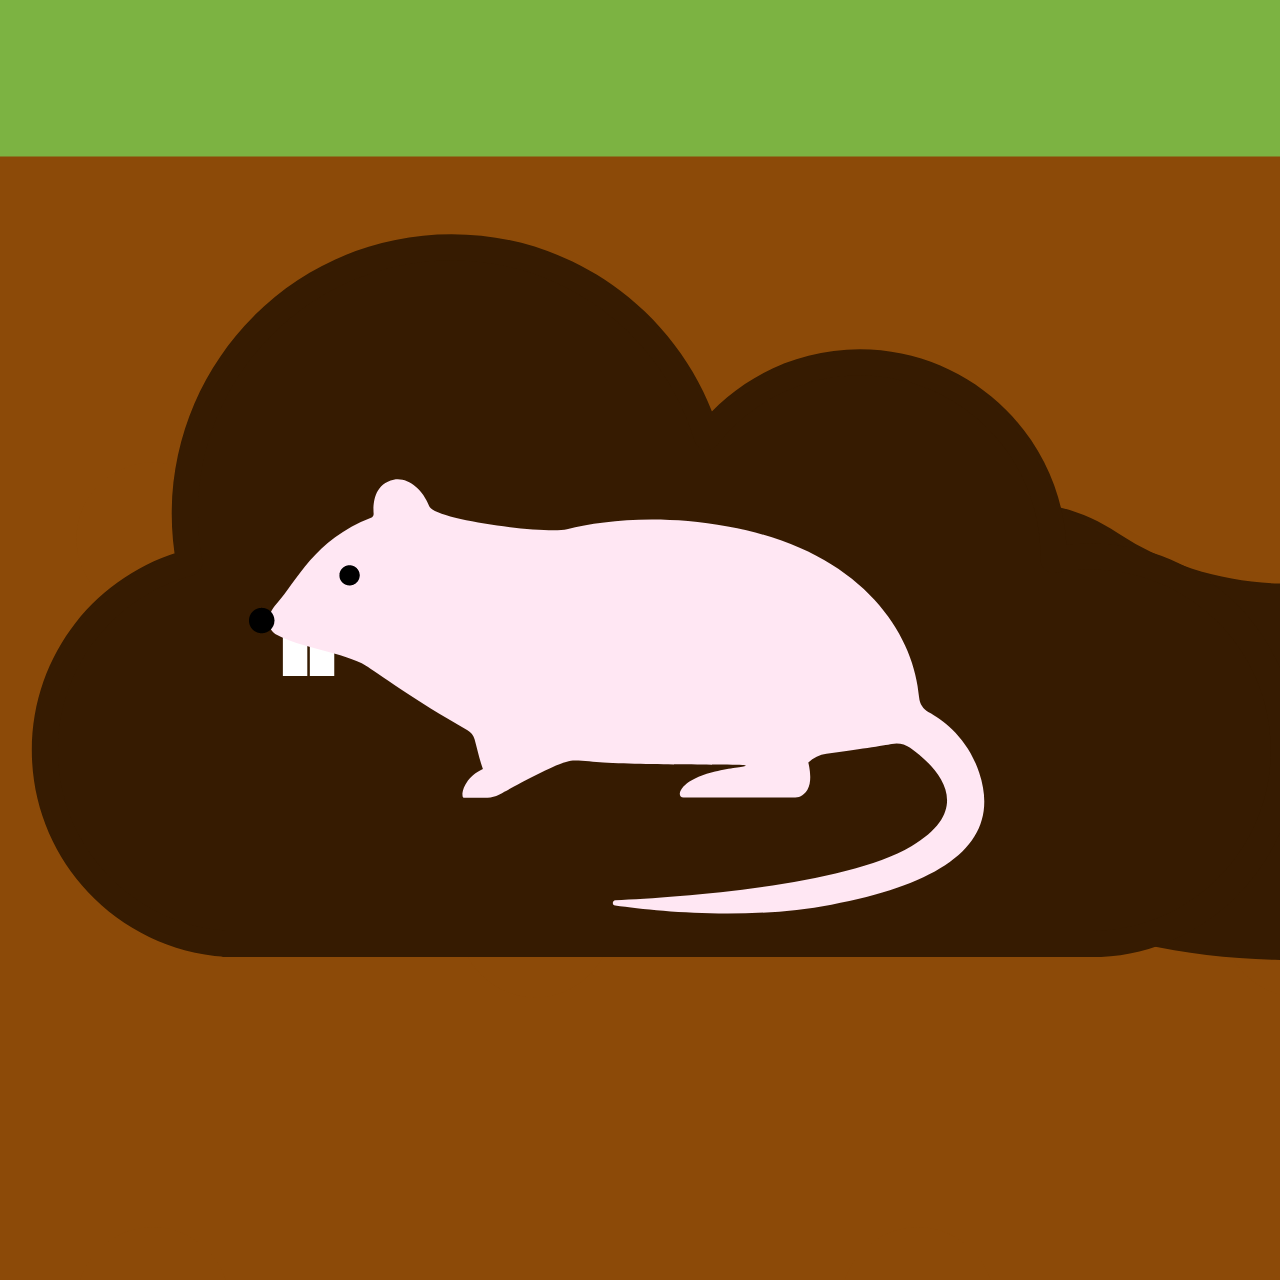 An illustrated naked mole rat under the ground